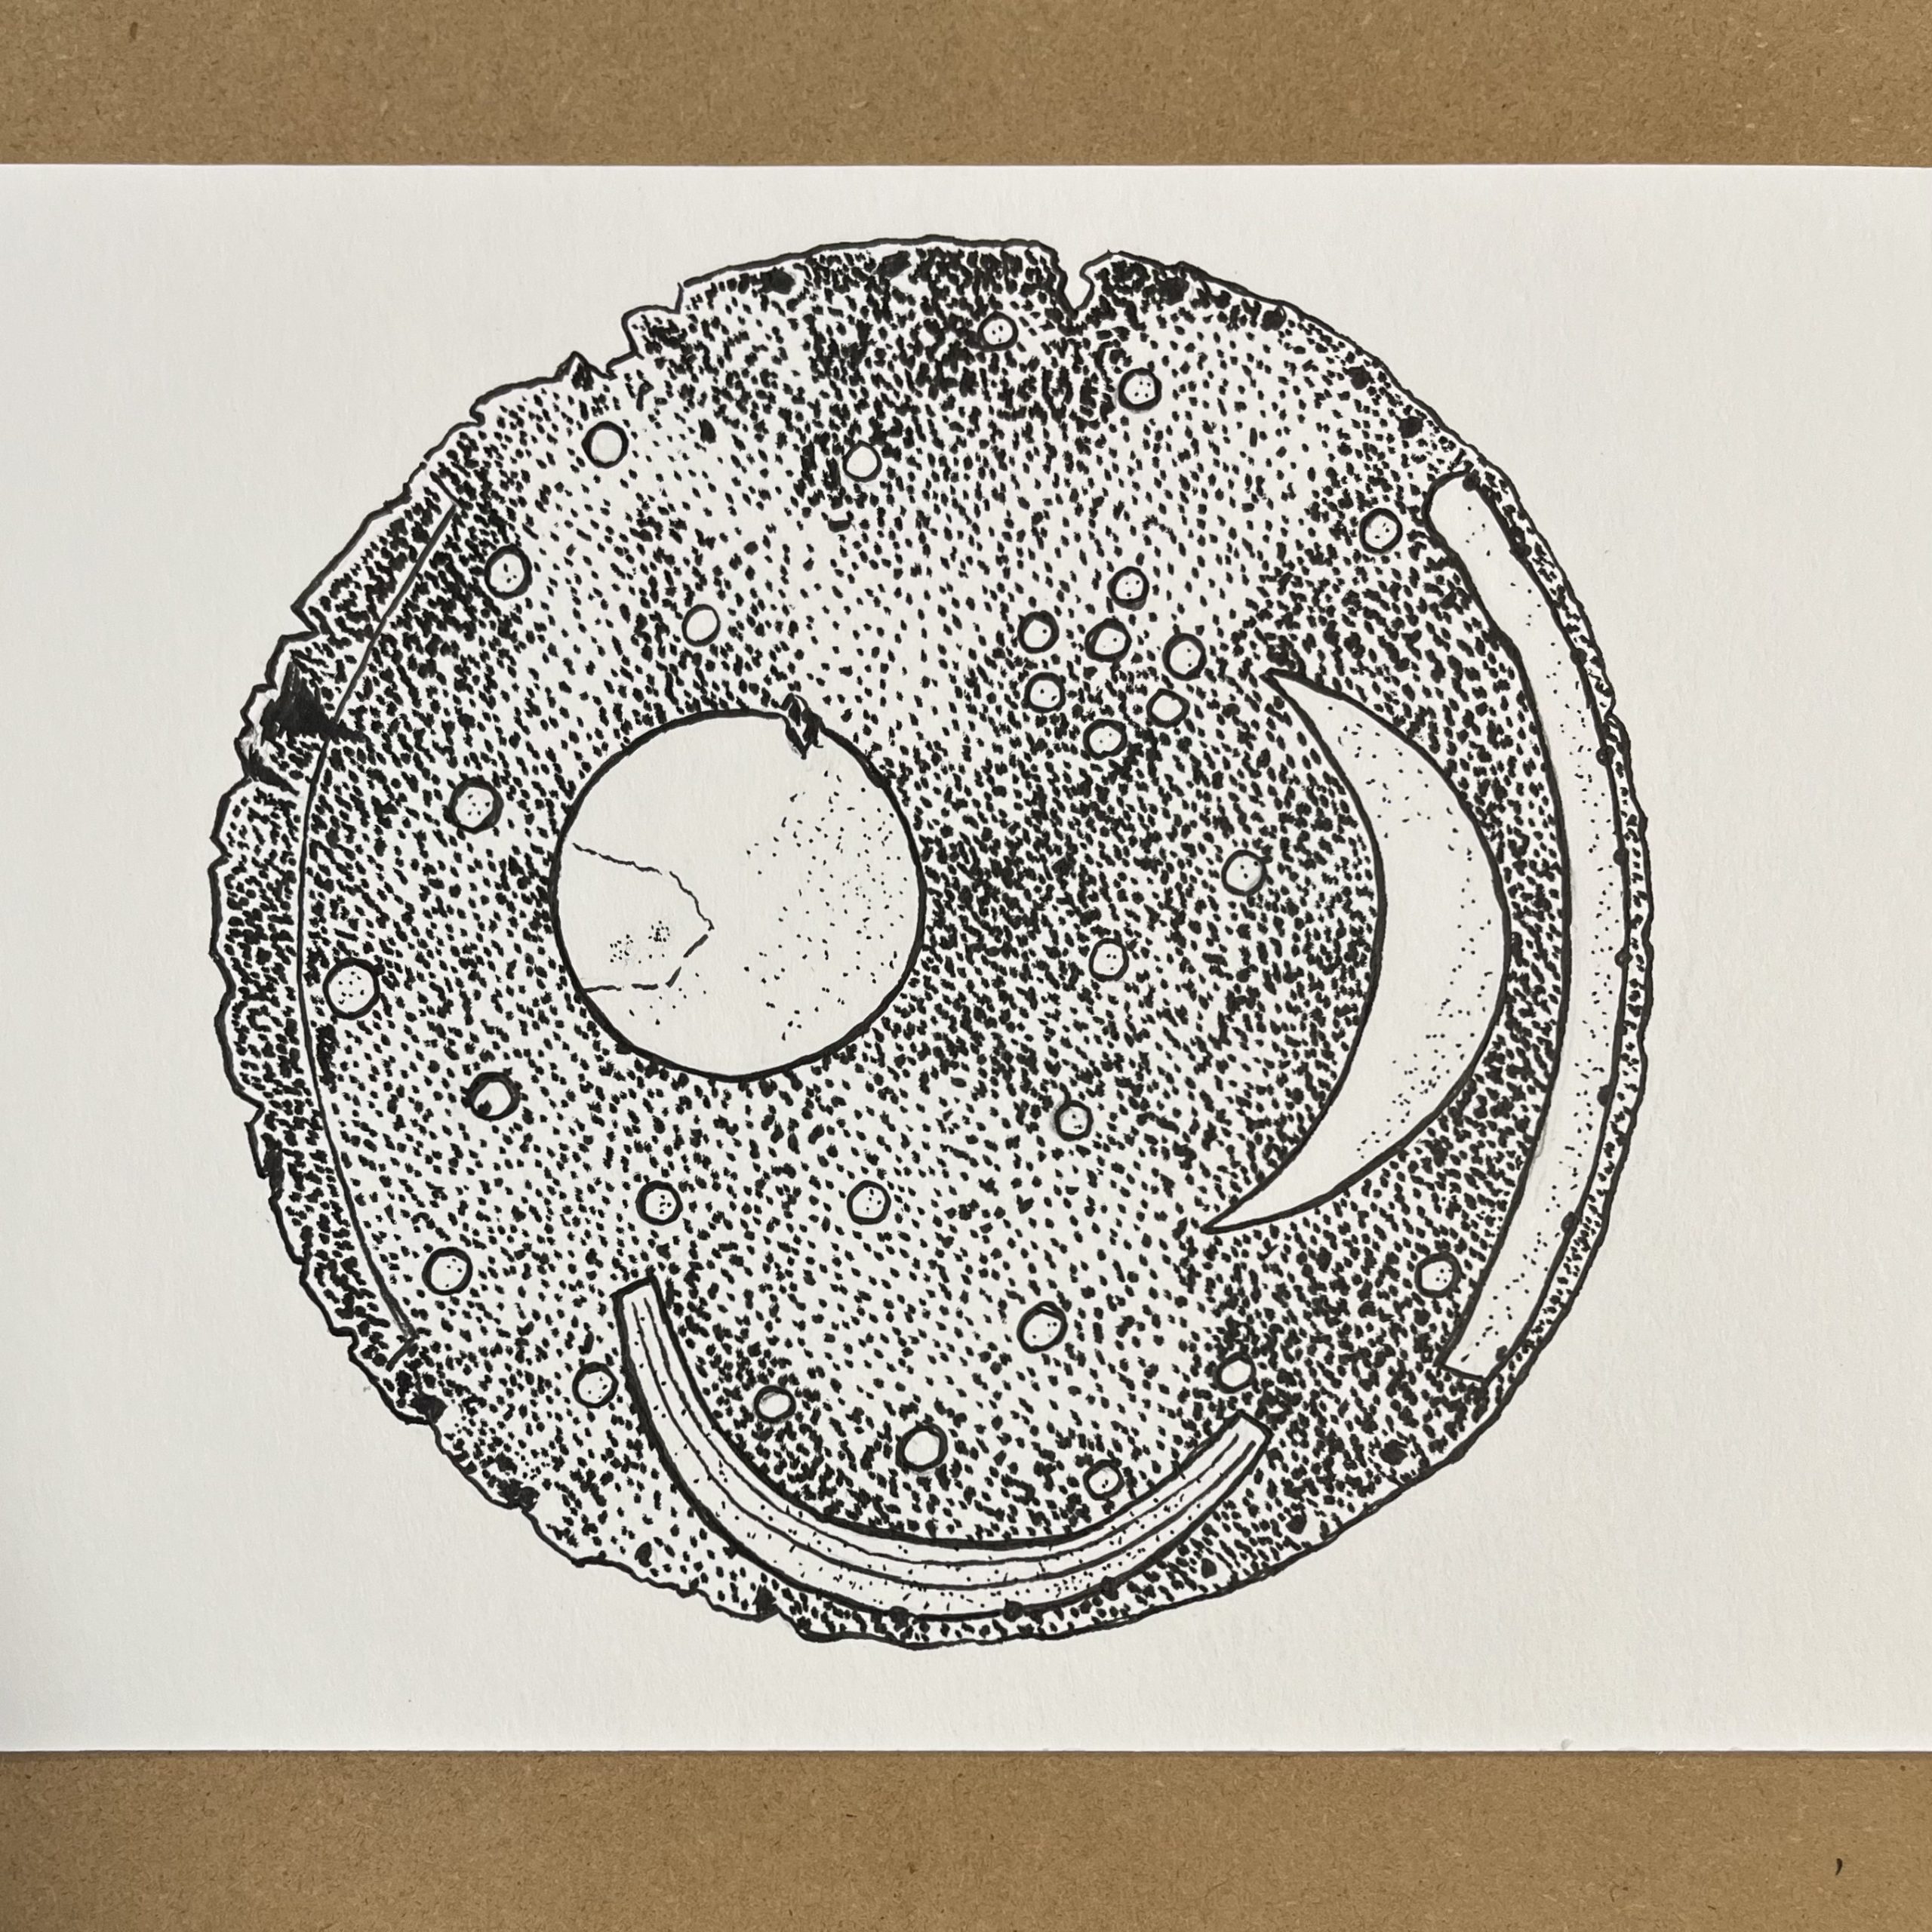 A pen and ink drawing of the Nebra Sky Disc.